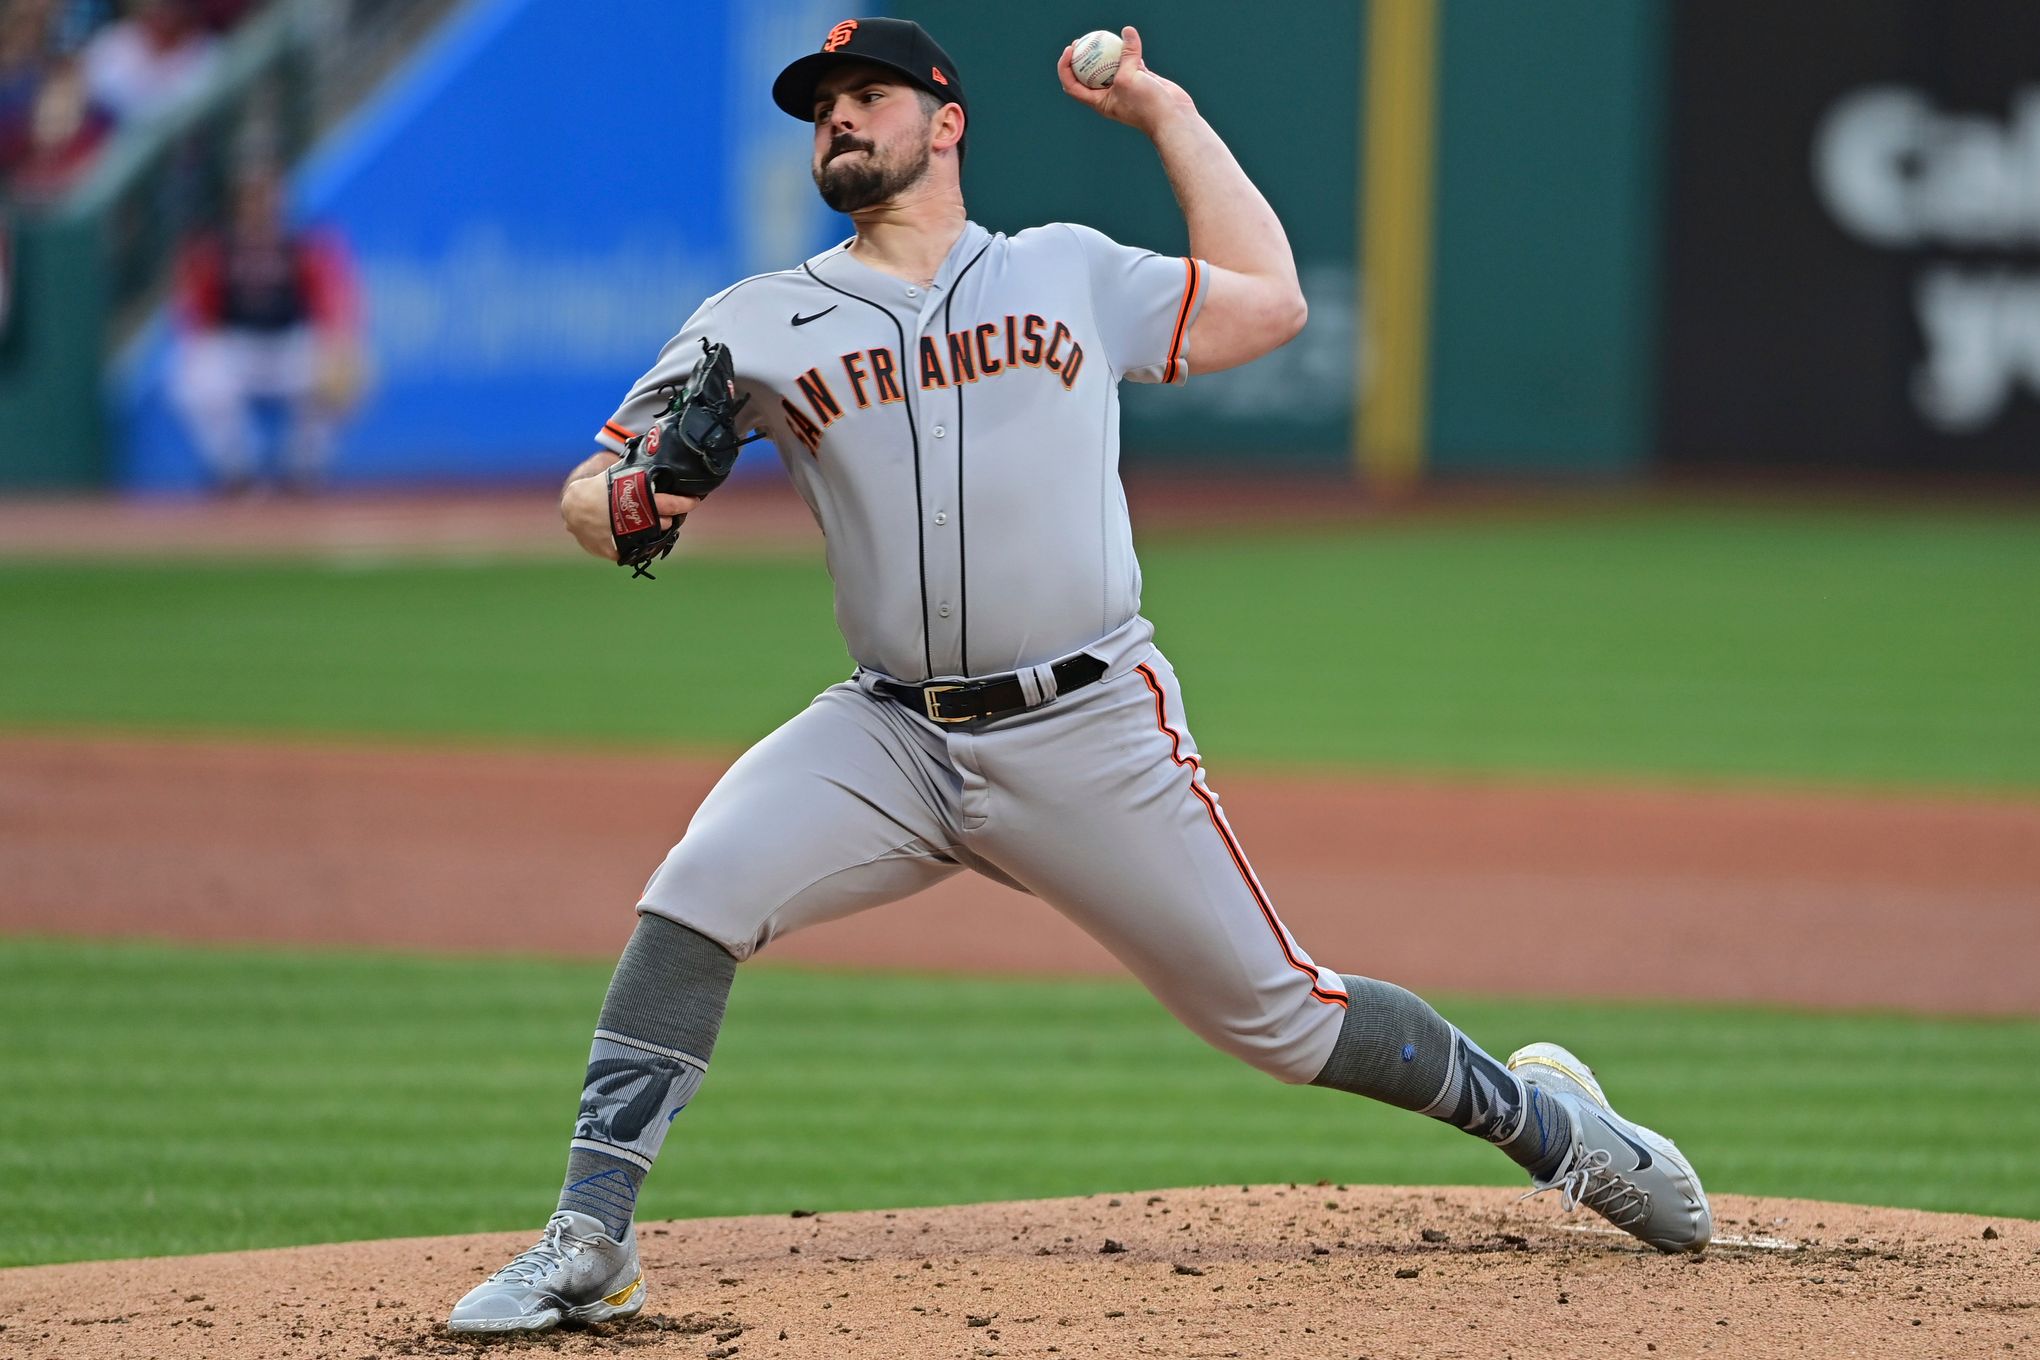 Rodón works 7 strong innings, Giants top Guardians 4-1